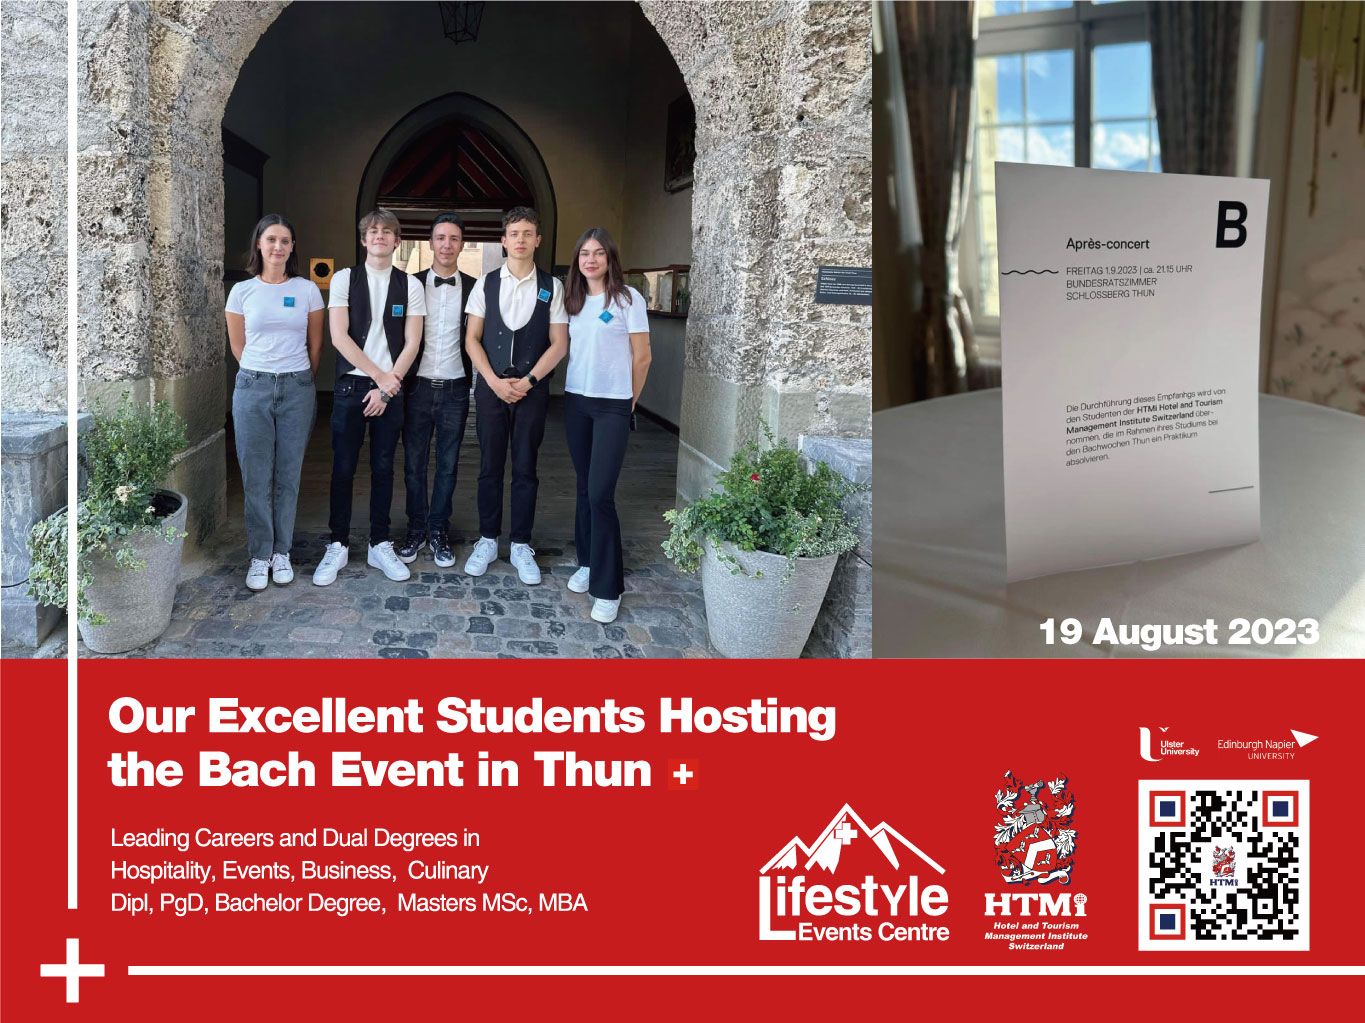 Our Excellent Students Hosting the Bach Event in Thun